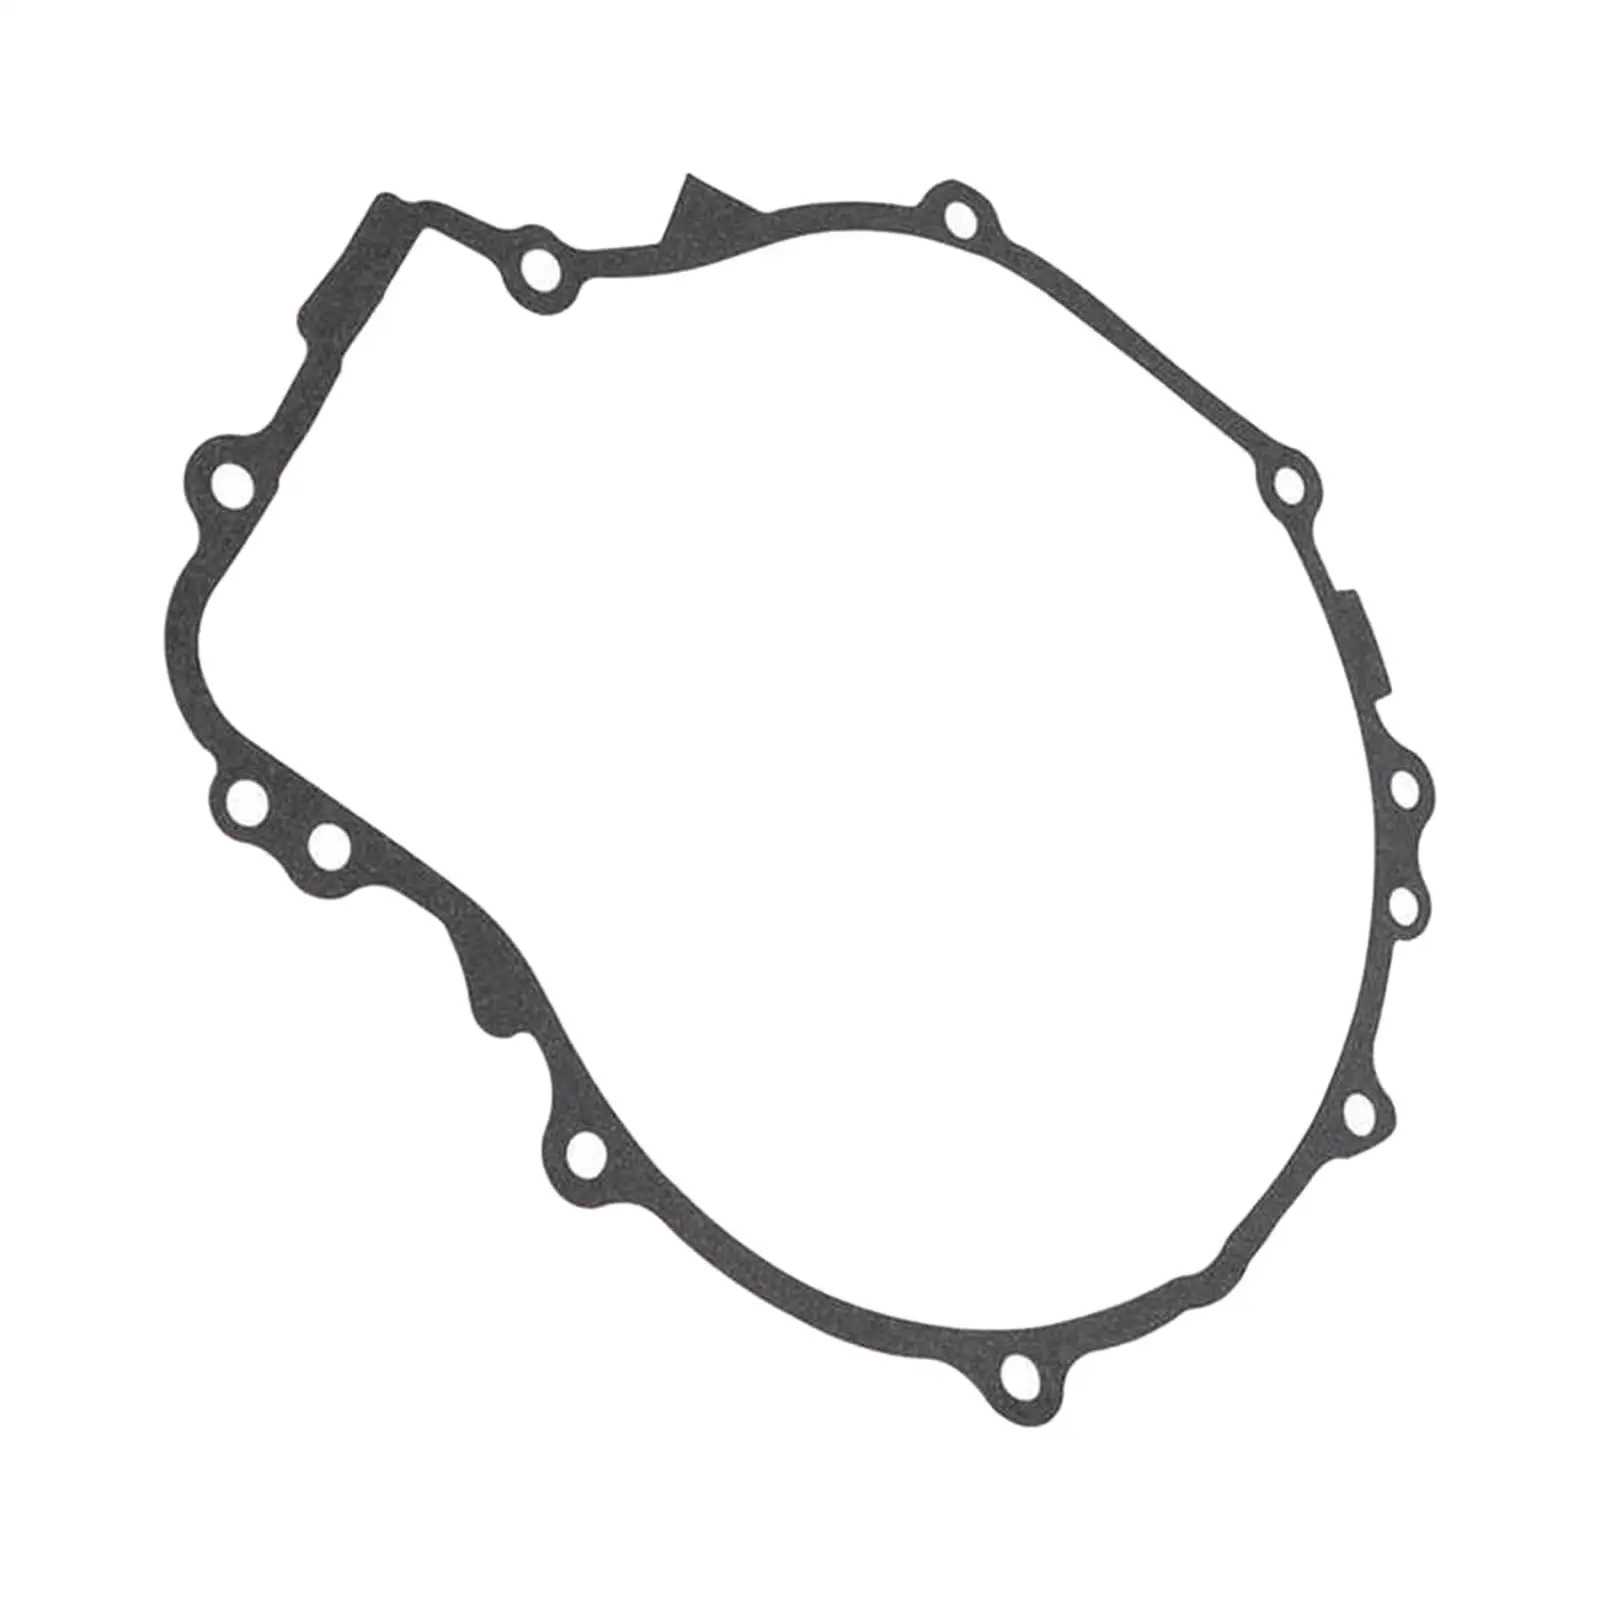 Automotive Pull Start Gasket 3084933 for Polaris Sportsman 500 1996?2011 Replacement Durable